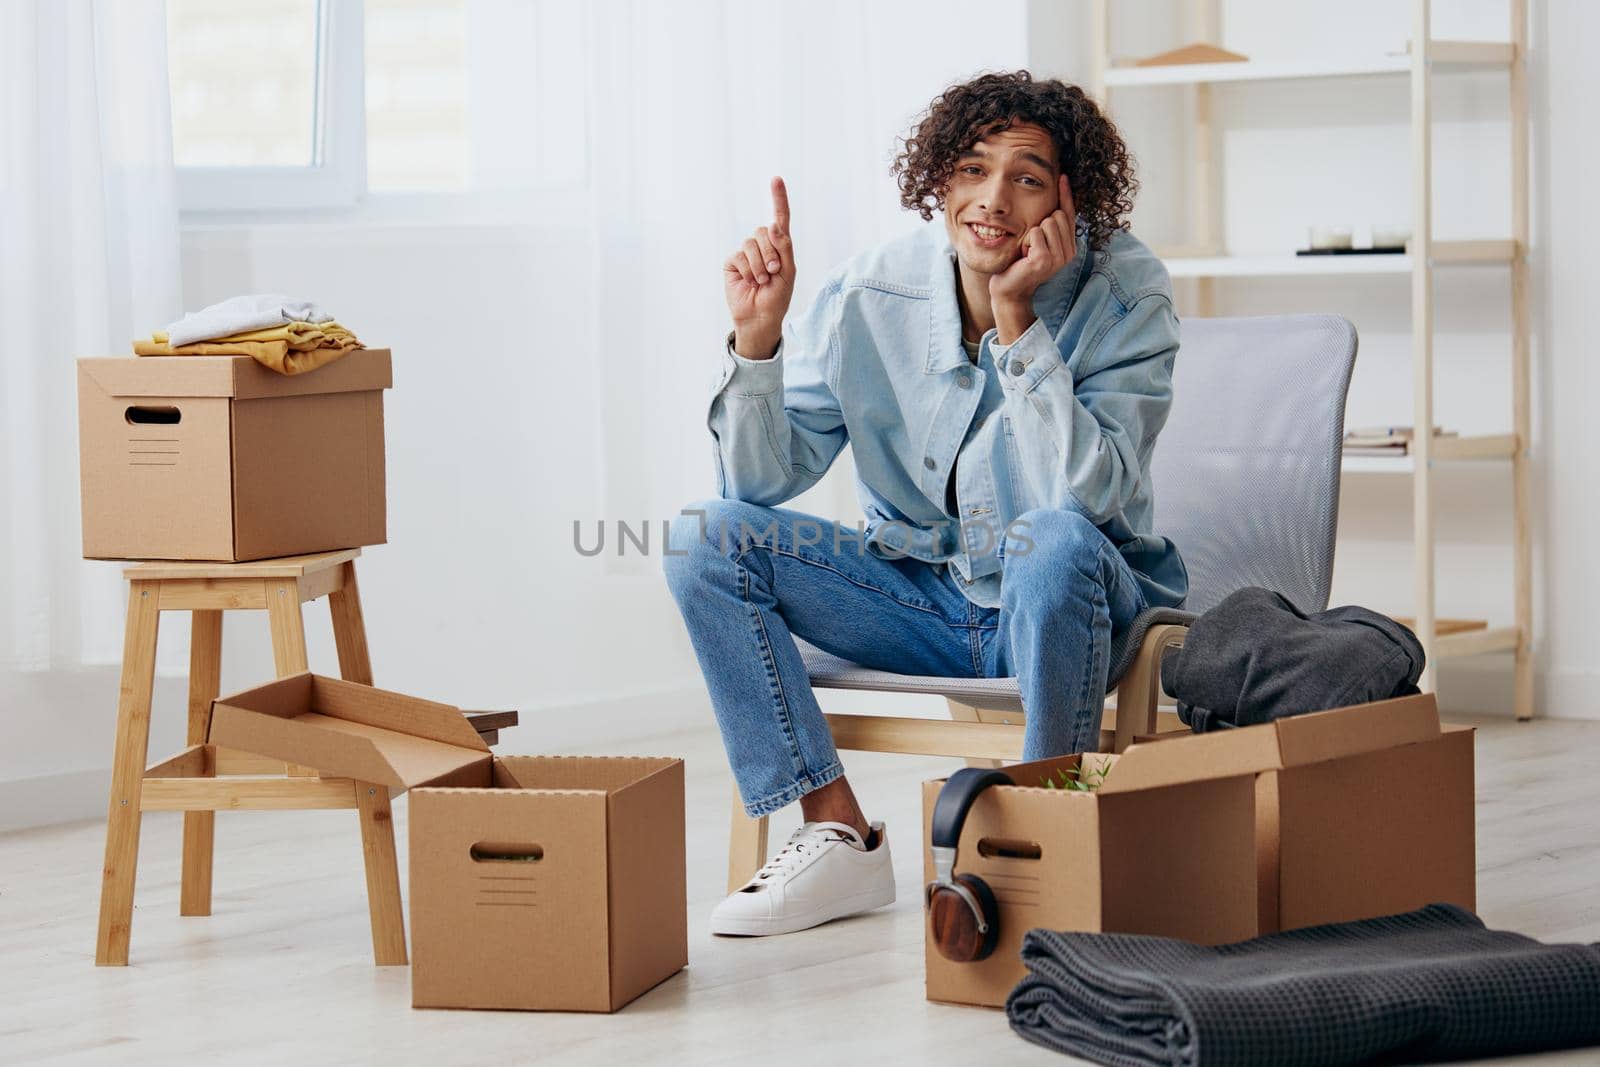 guy with curly hair unpacking things from boxes in the room Lifestyle. High quality photo